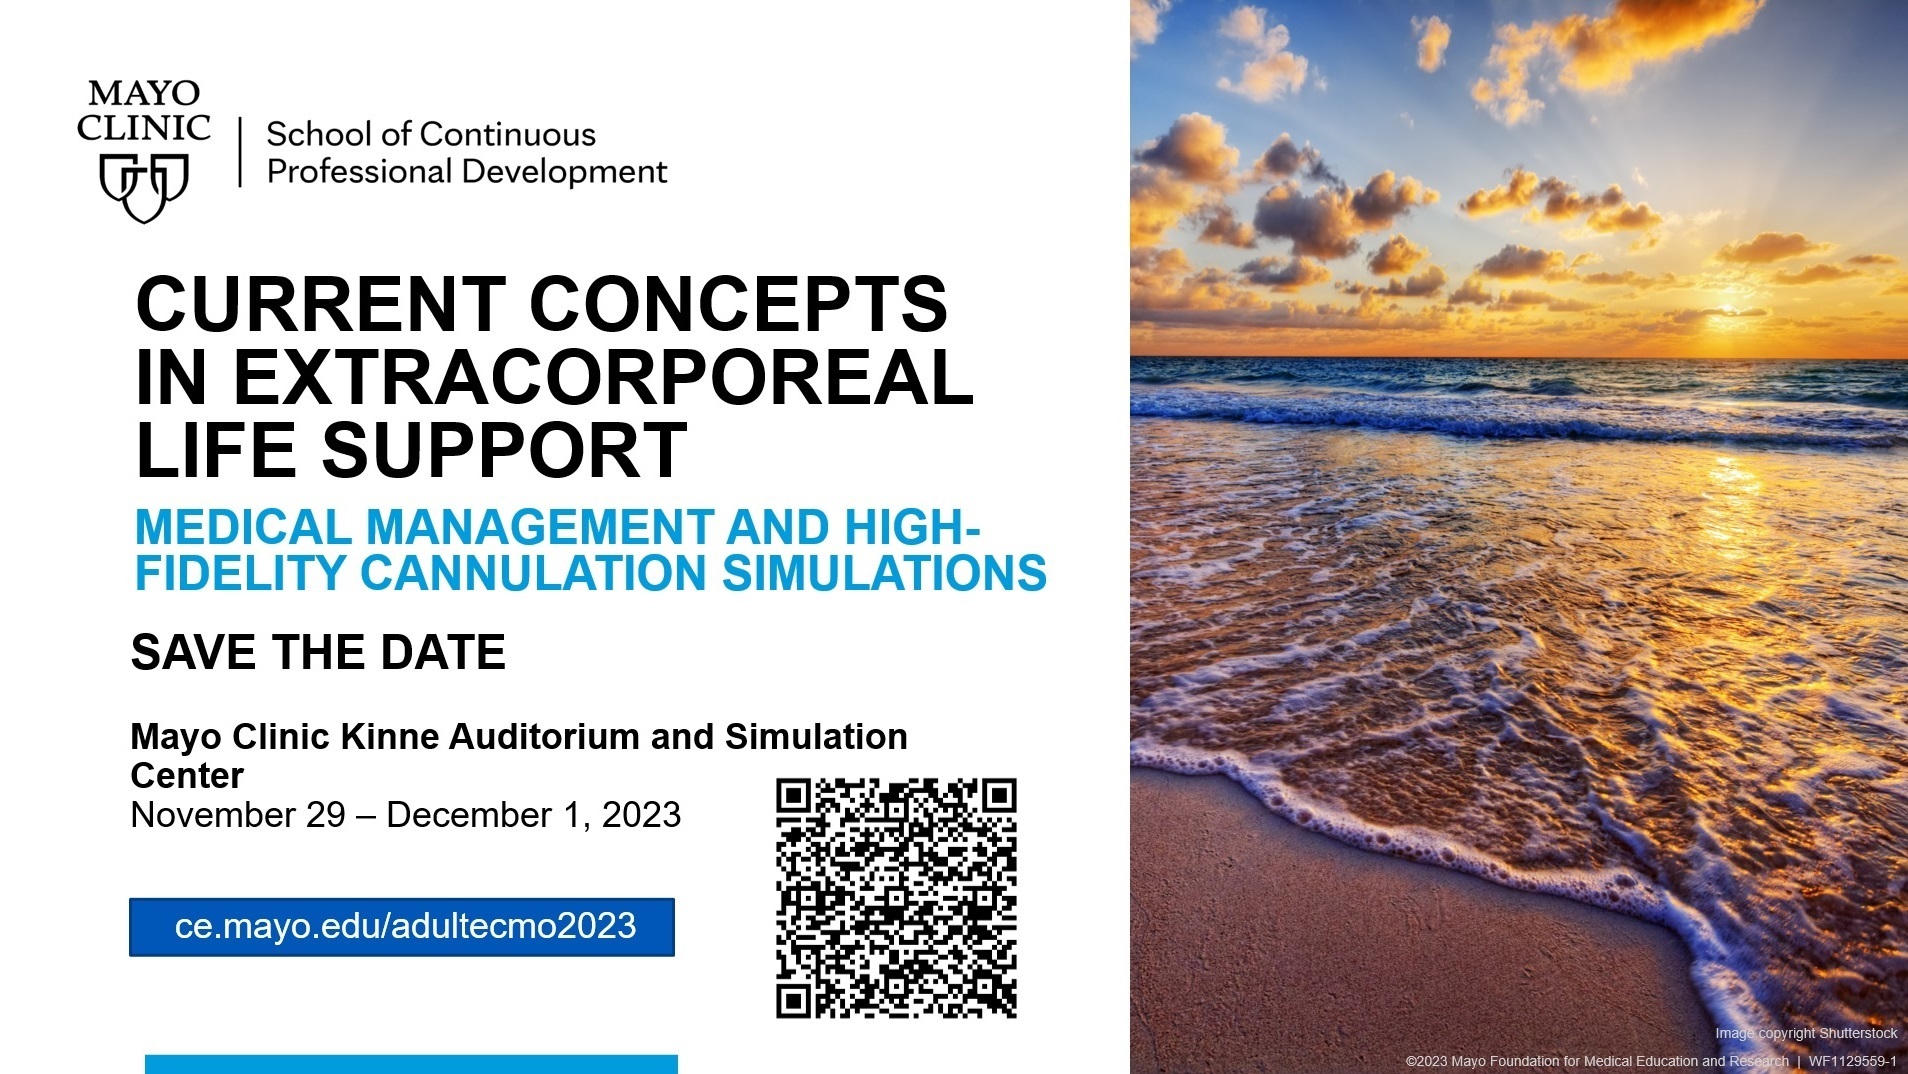 Current Concepts in Extracorporeal Life Support: Medical Management and Cannulation Simulations 2023